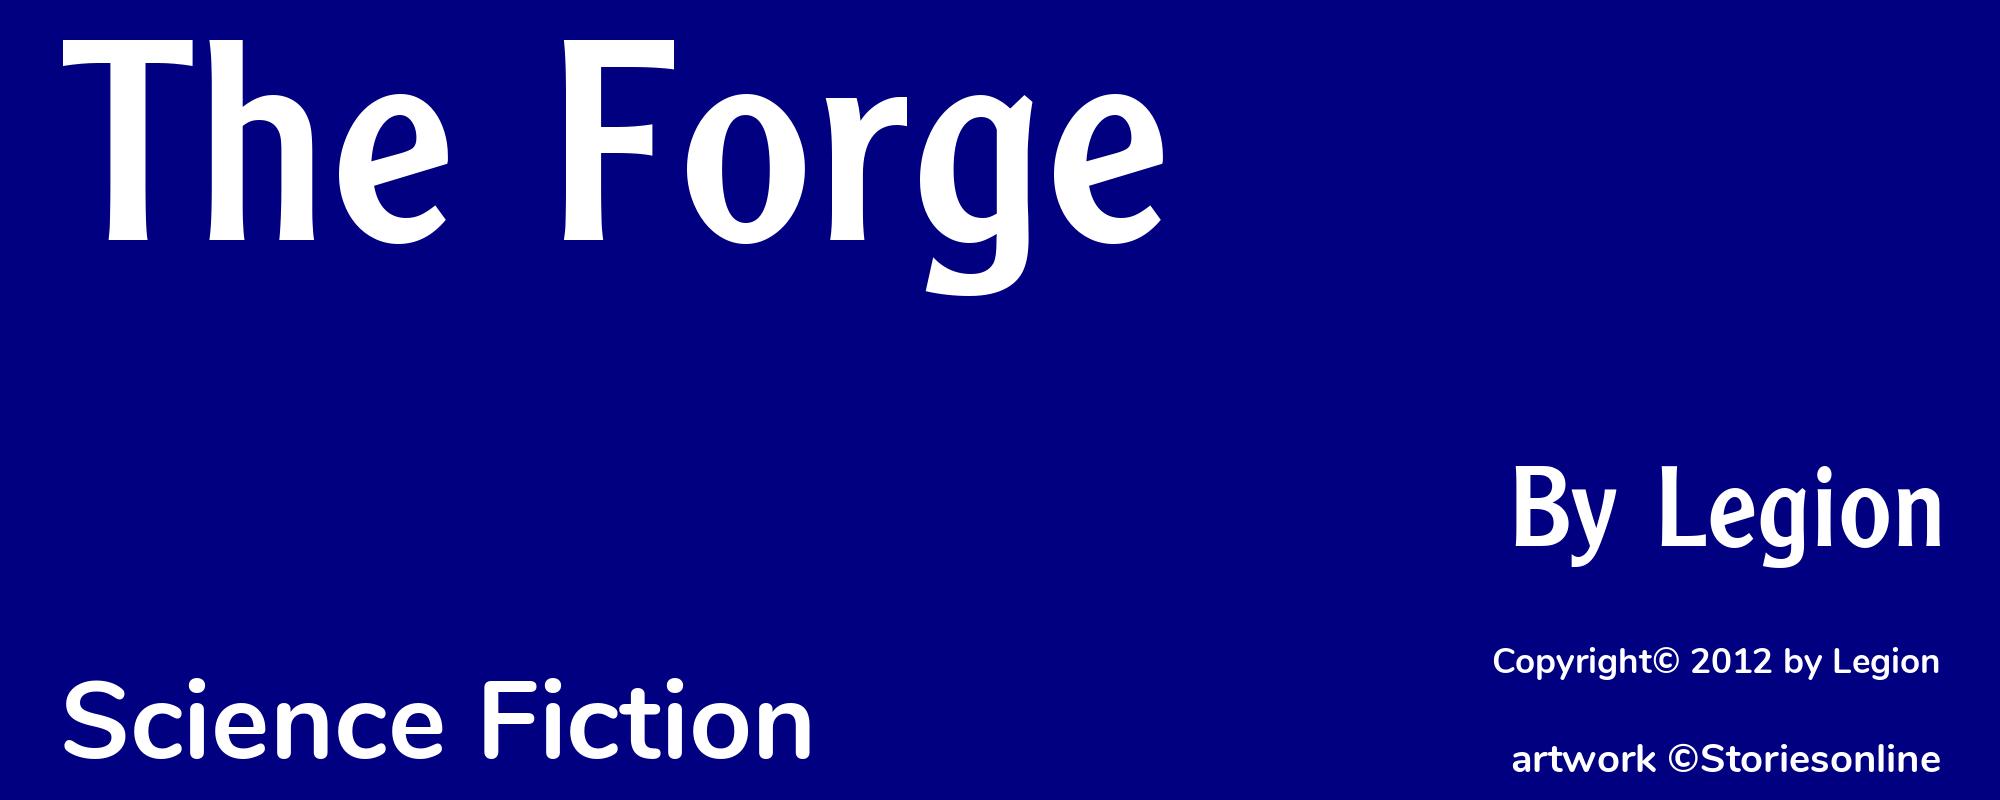 The Forge - Cover